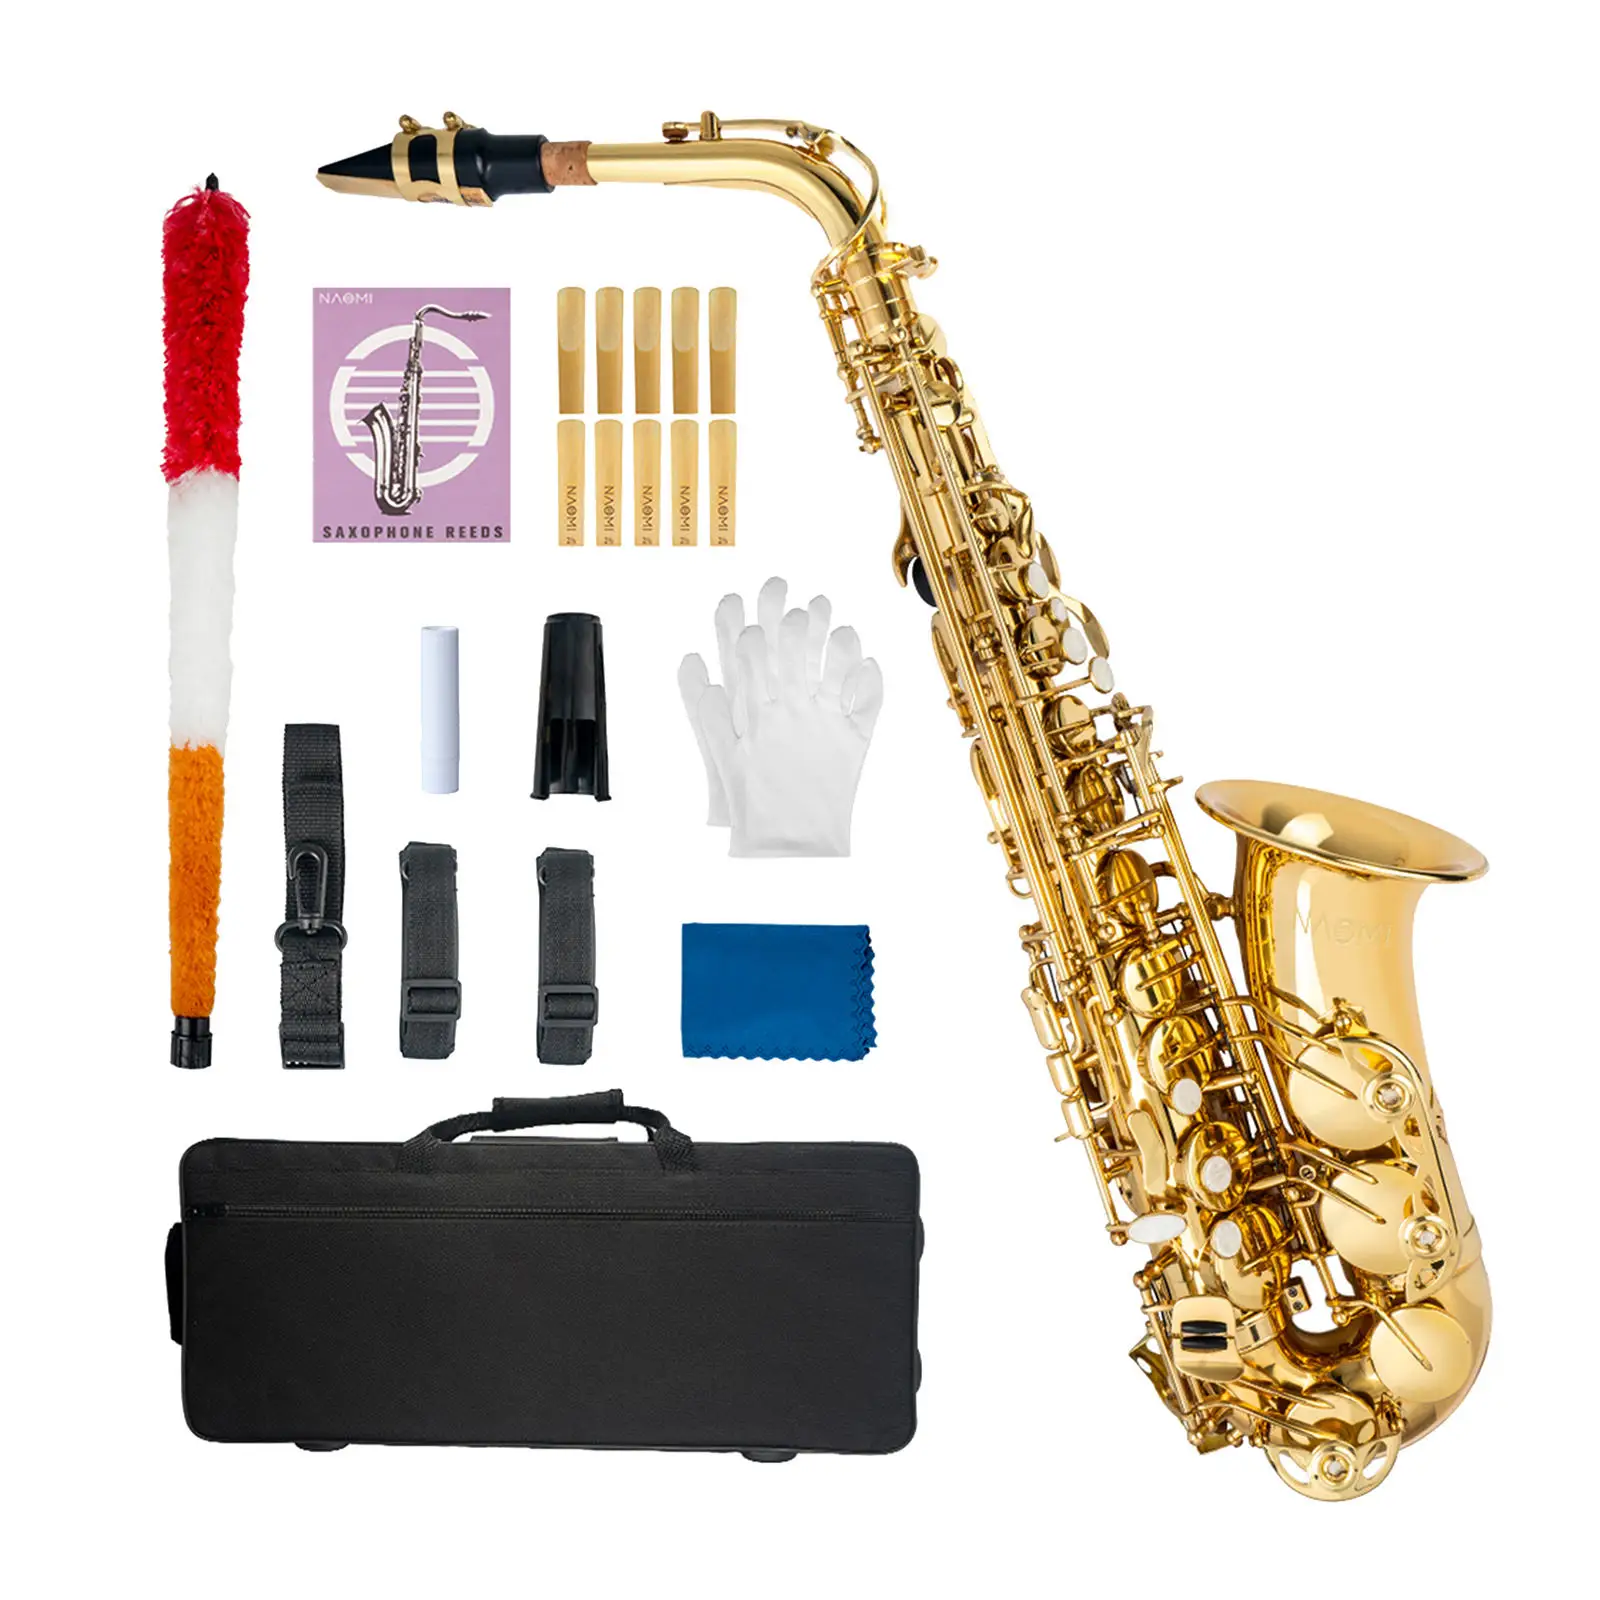 

NSA-802 Eb Alto Saxophone Brass Gold Lacquer Sax Music Instrument with Case Accessories Cork Grease Reeds Cleaning Gloves